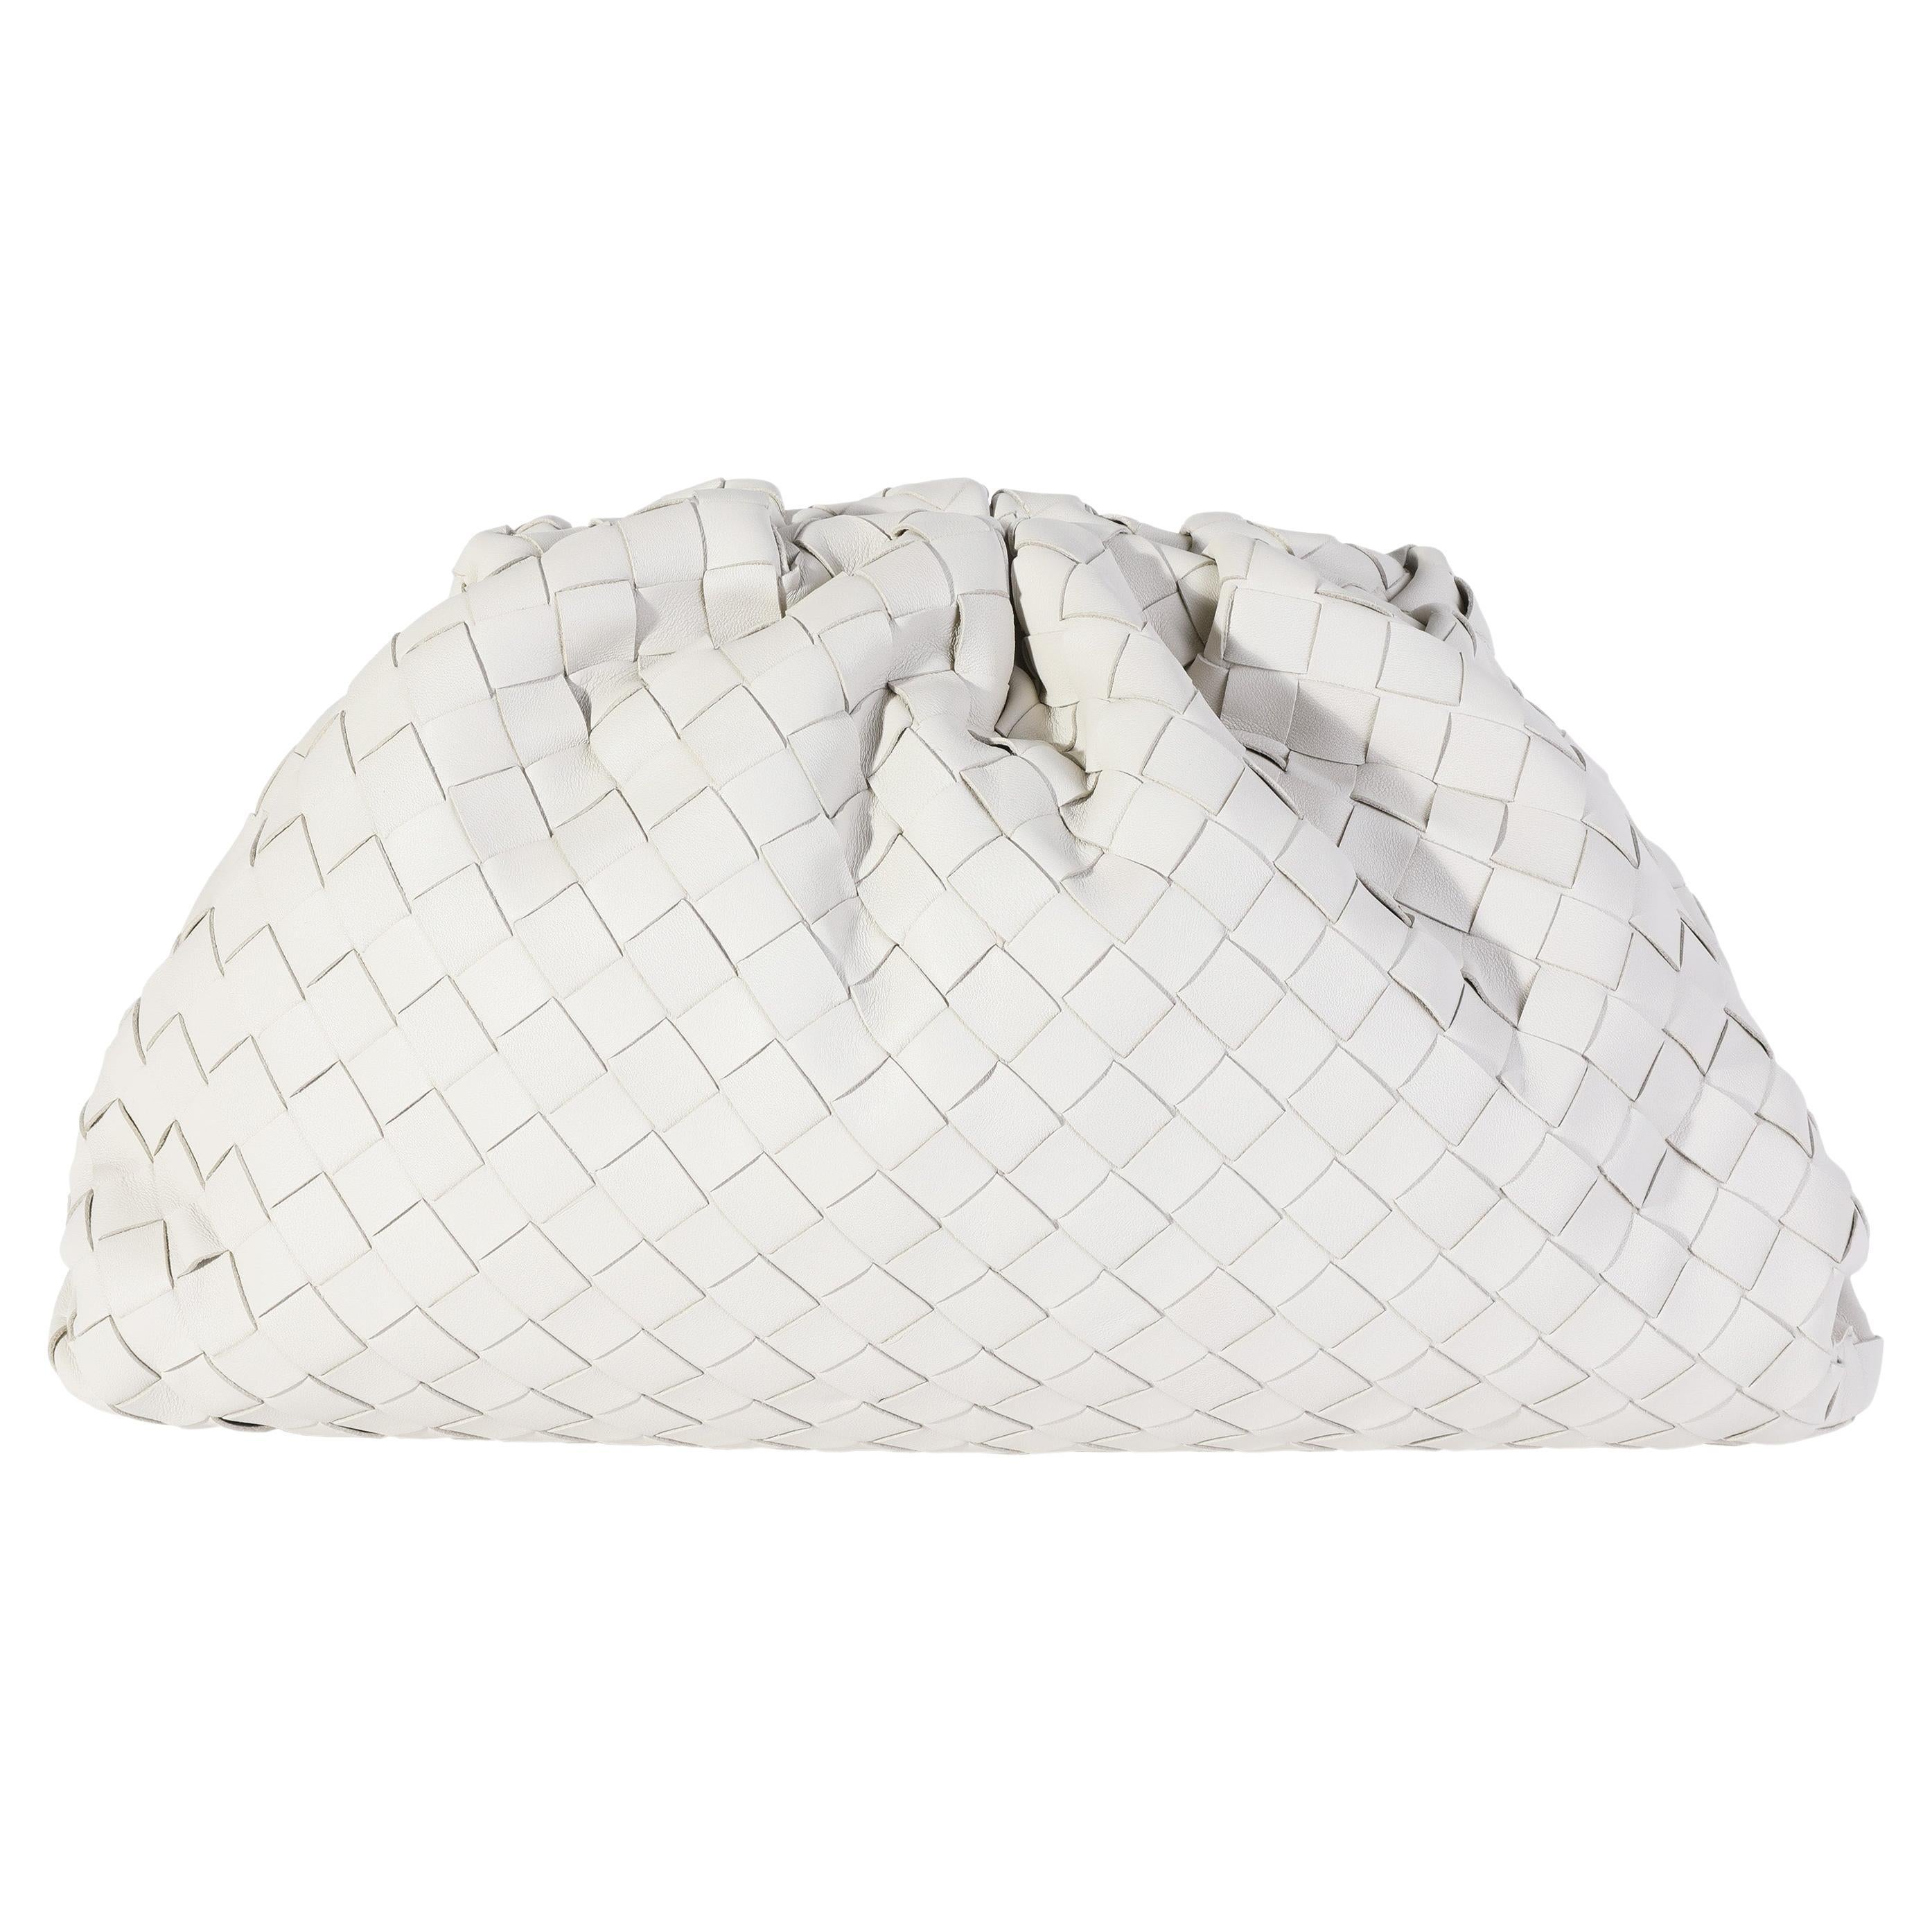 Bottega Veneta Vintage Woven Grey Lizard and Leather Clutch For Sale at ...